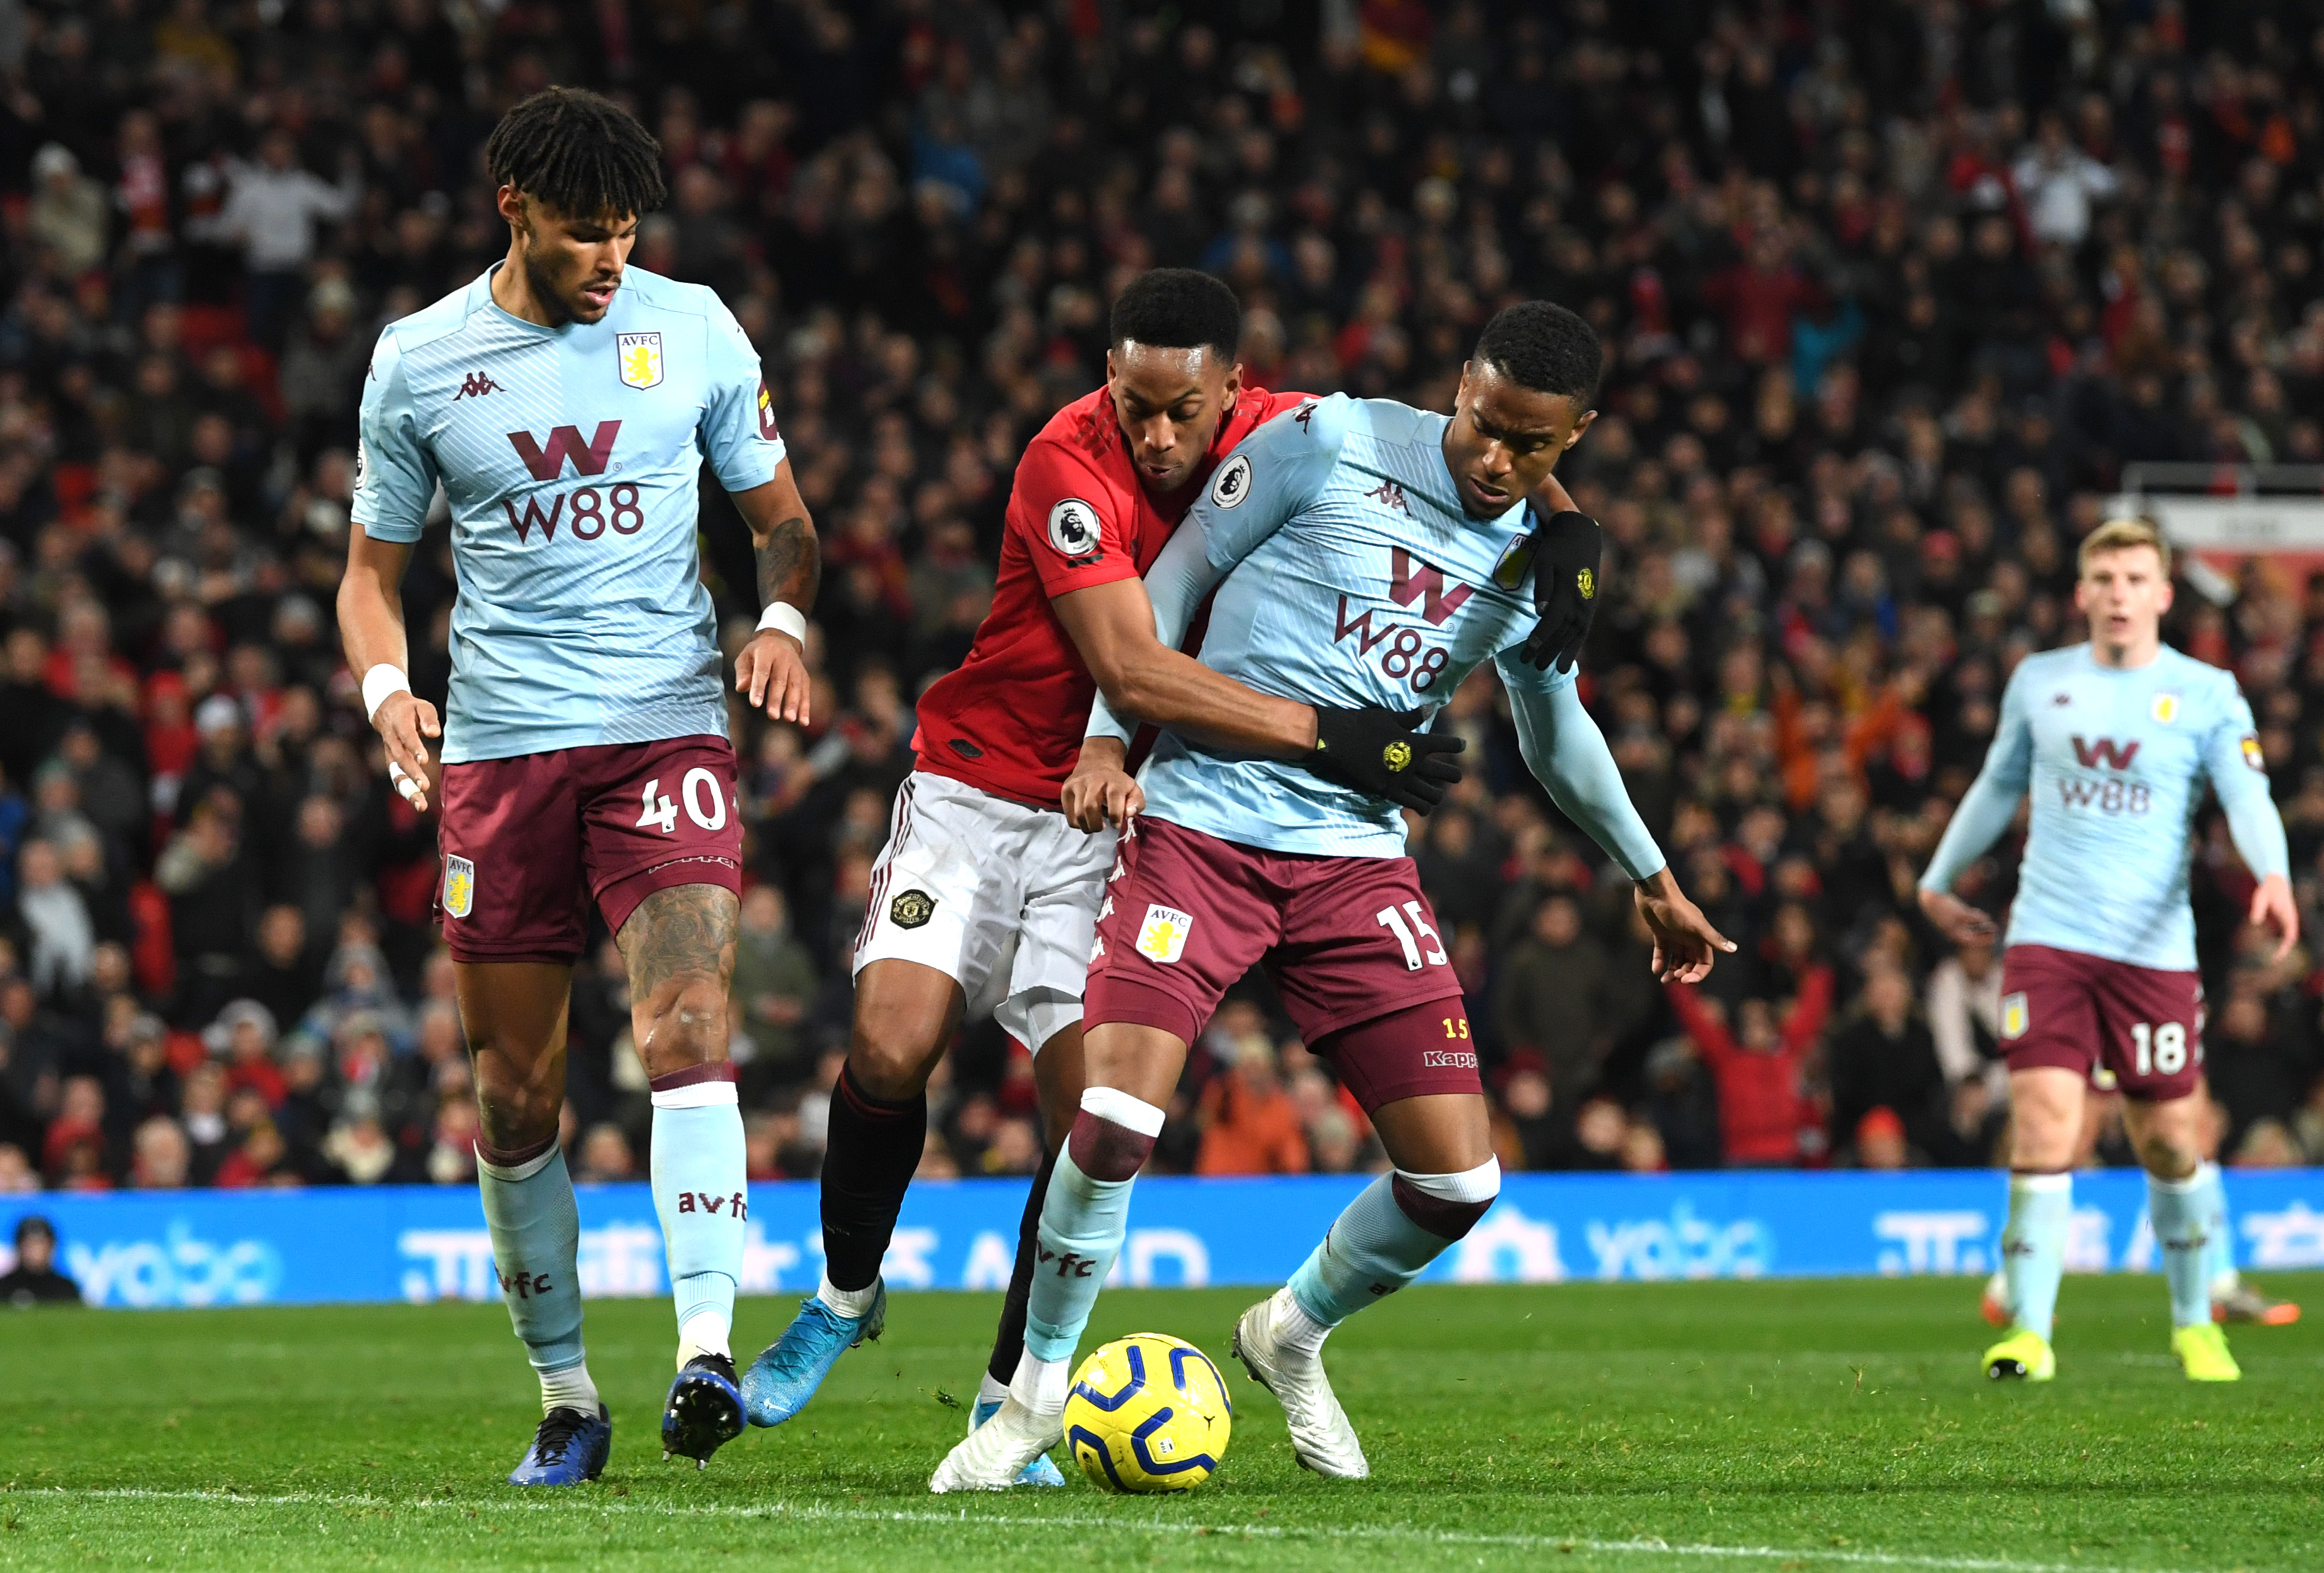 Shut down quite well by Aston Villa defenders. (Picture Courtesy - AFP/Getty Images)